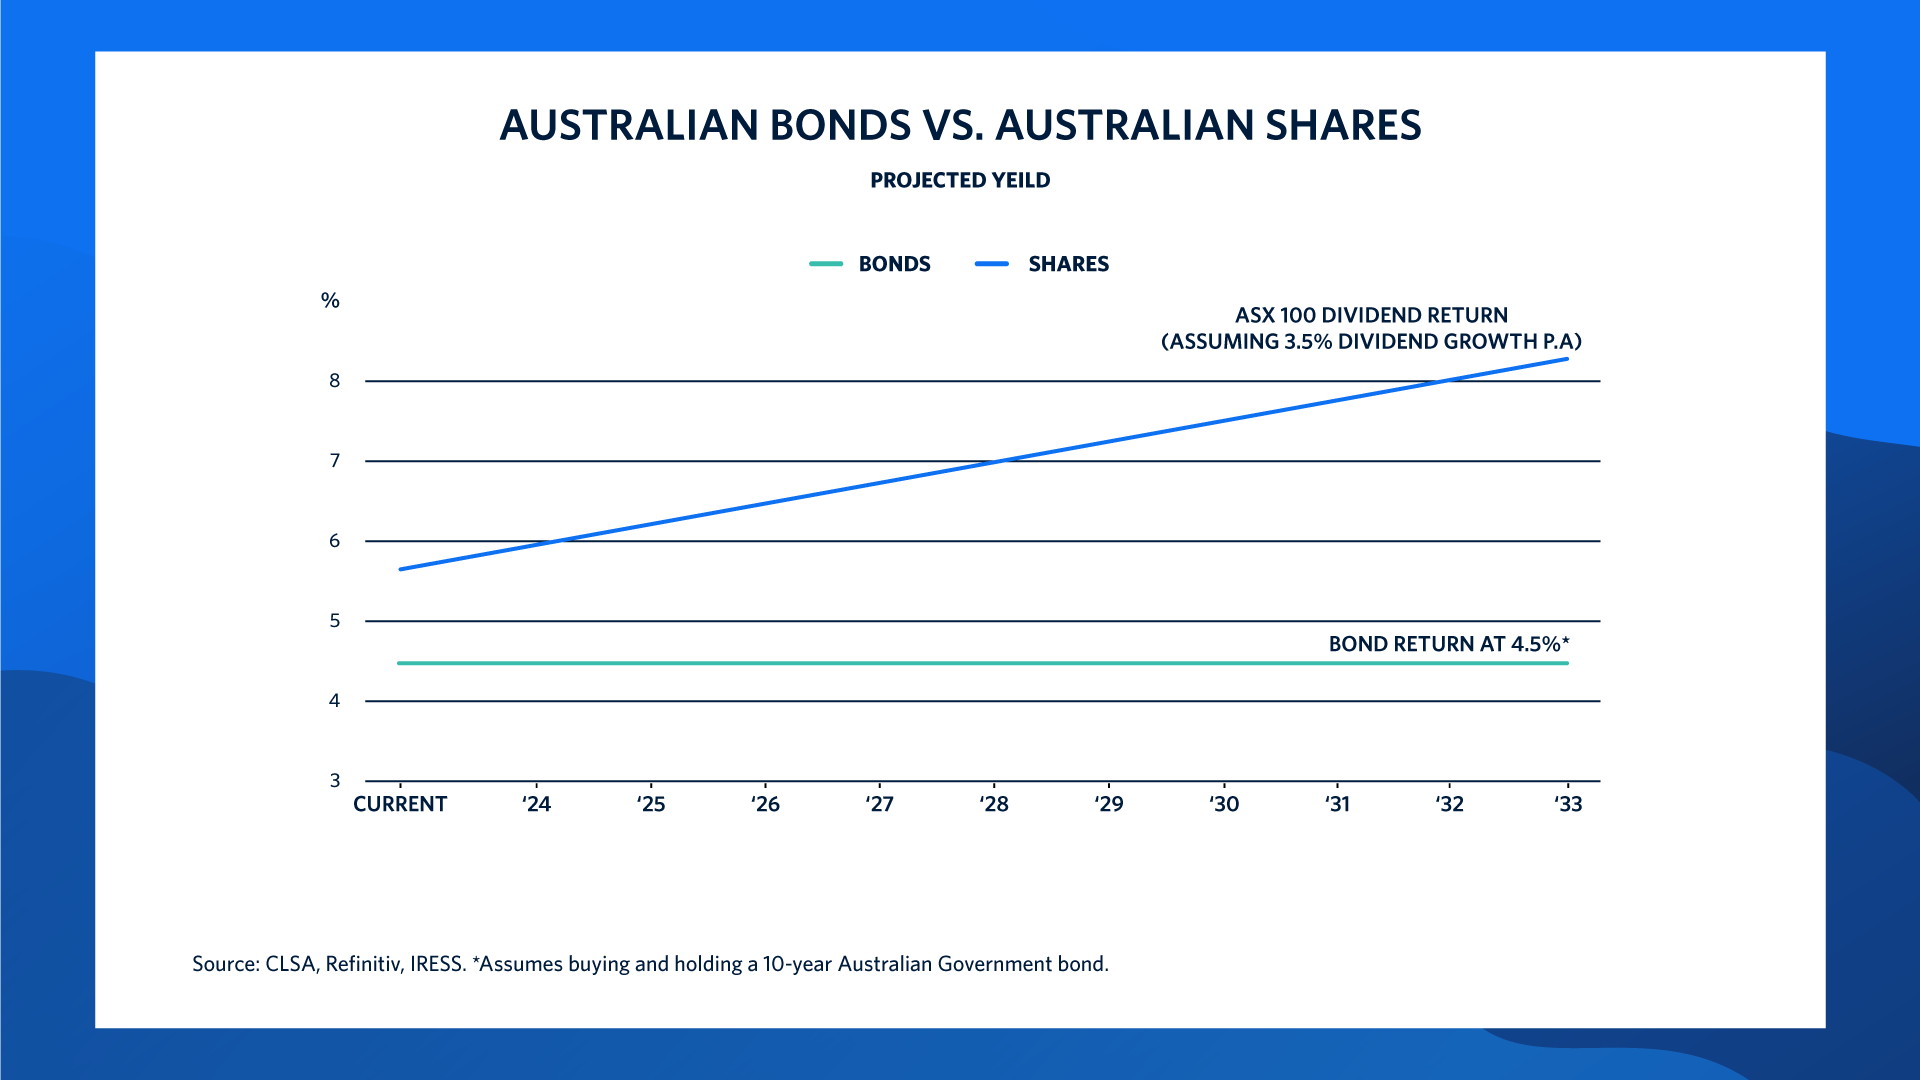 Chart 5: A chart shows that the projected yield of Australian bonds vs. Australian shares—from the current bond yield of 4.5%—over the next 10 years remaining flat. The projected yield for Australian shares—from its current position at 5.8%—over the next 10 years grows to about 8.2% (assuming a 3.5% dividend growth). 